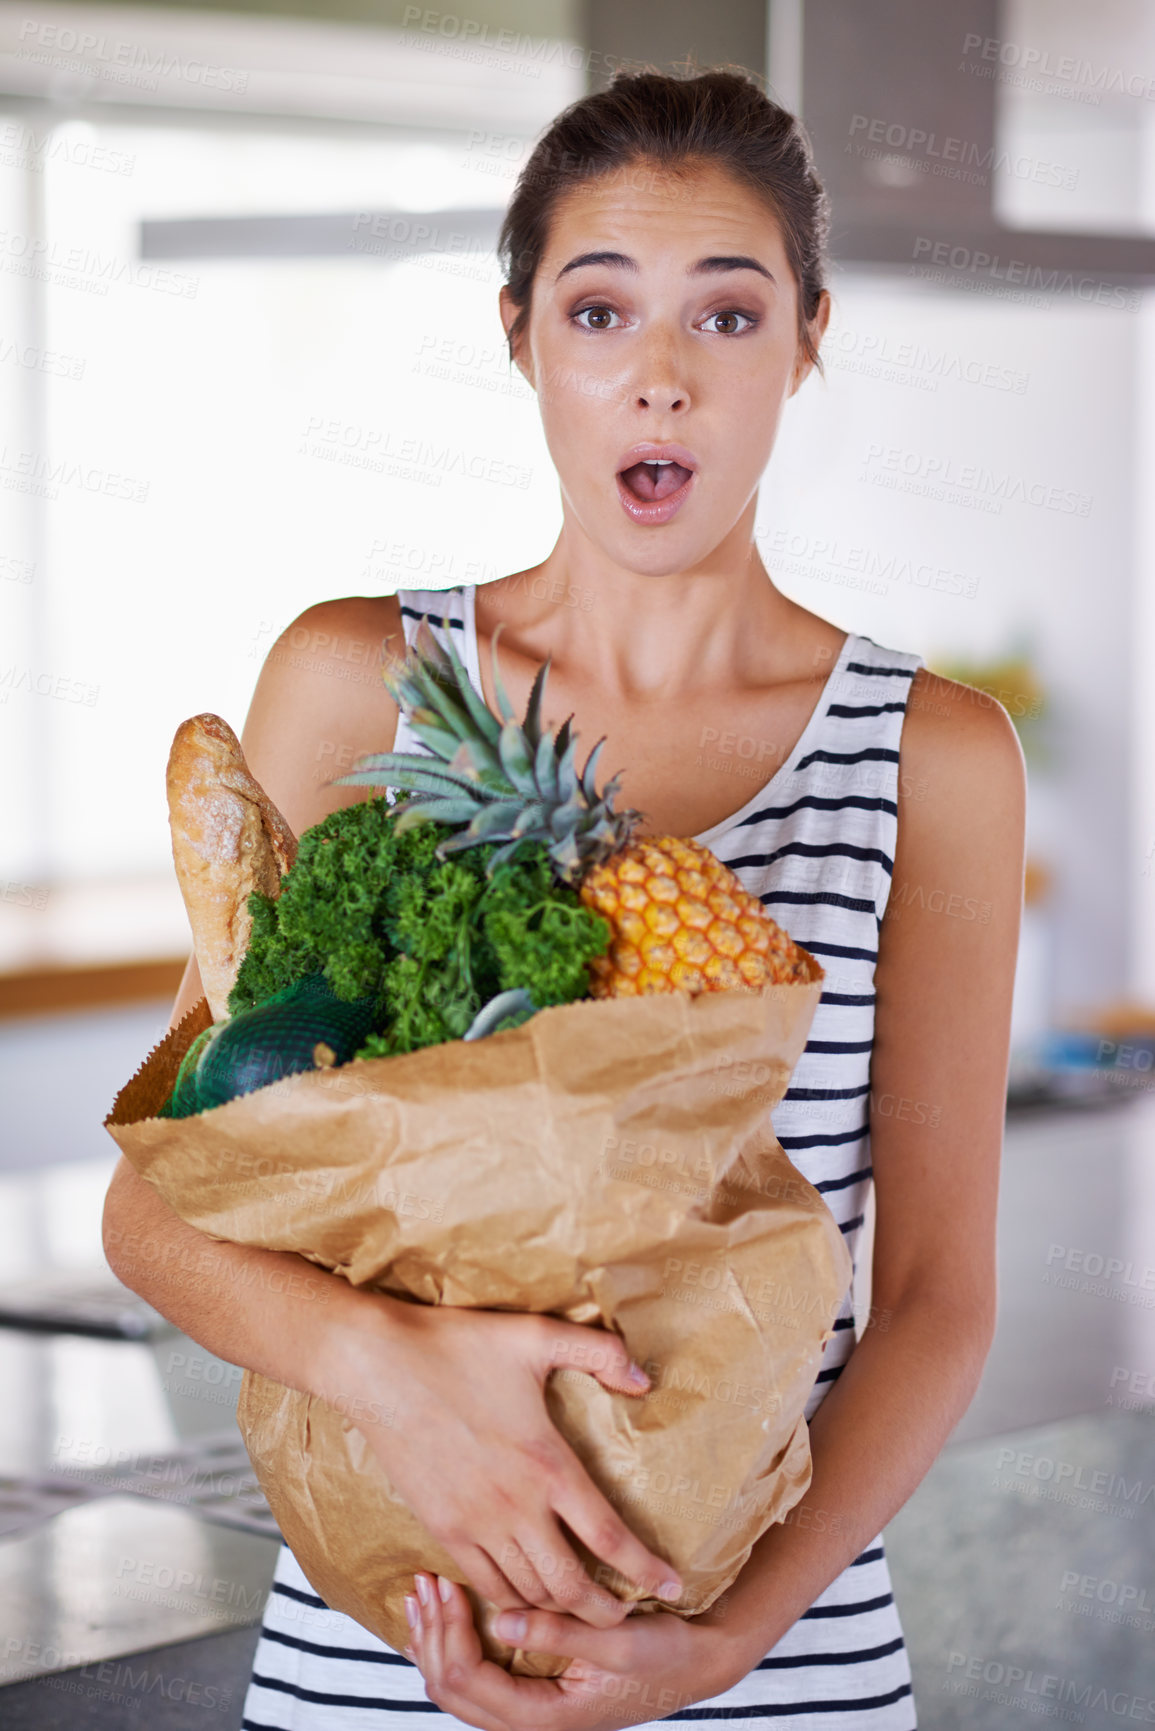 Buy stock photo Home, surprise or portrait of woman with groceries on promotion, sale or discounts deal on nutrition. Wow, news offer or shocked person buying healthy food for cooking organic fruits or diet choice